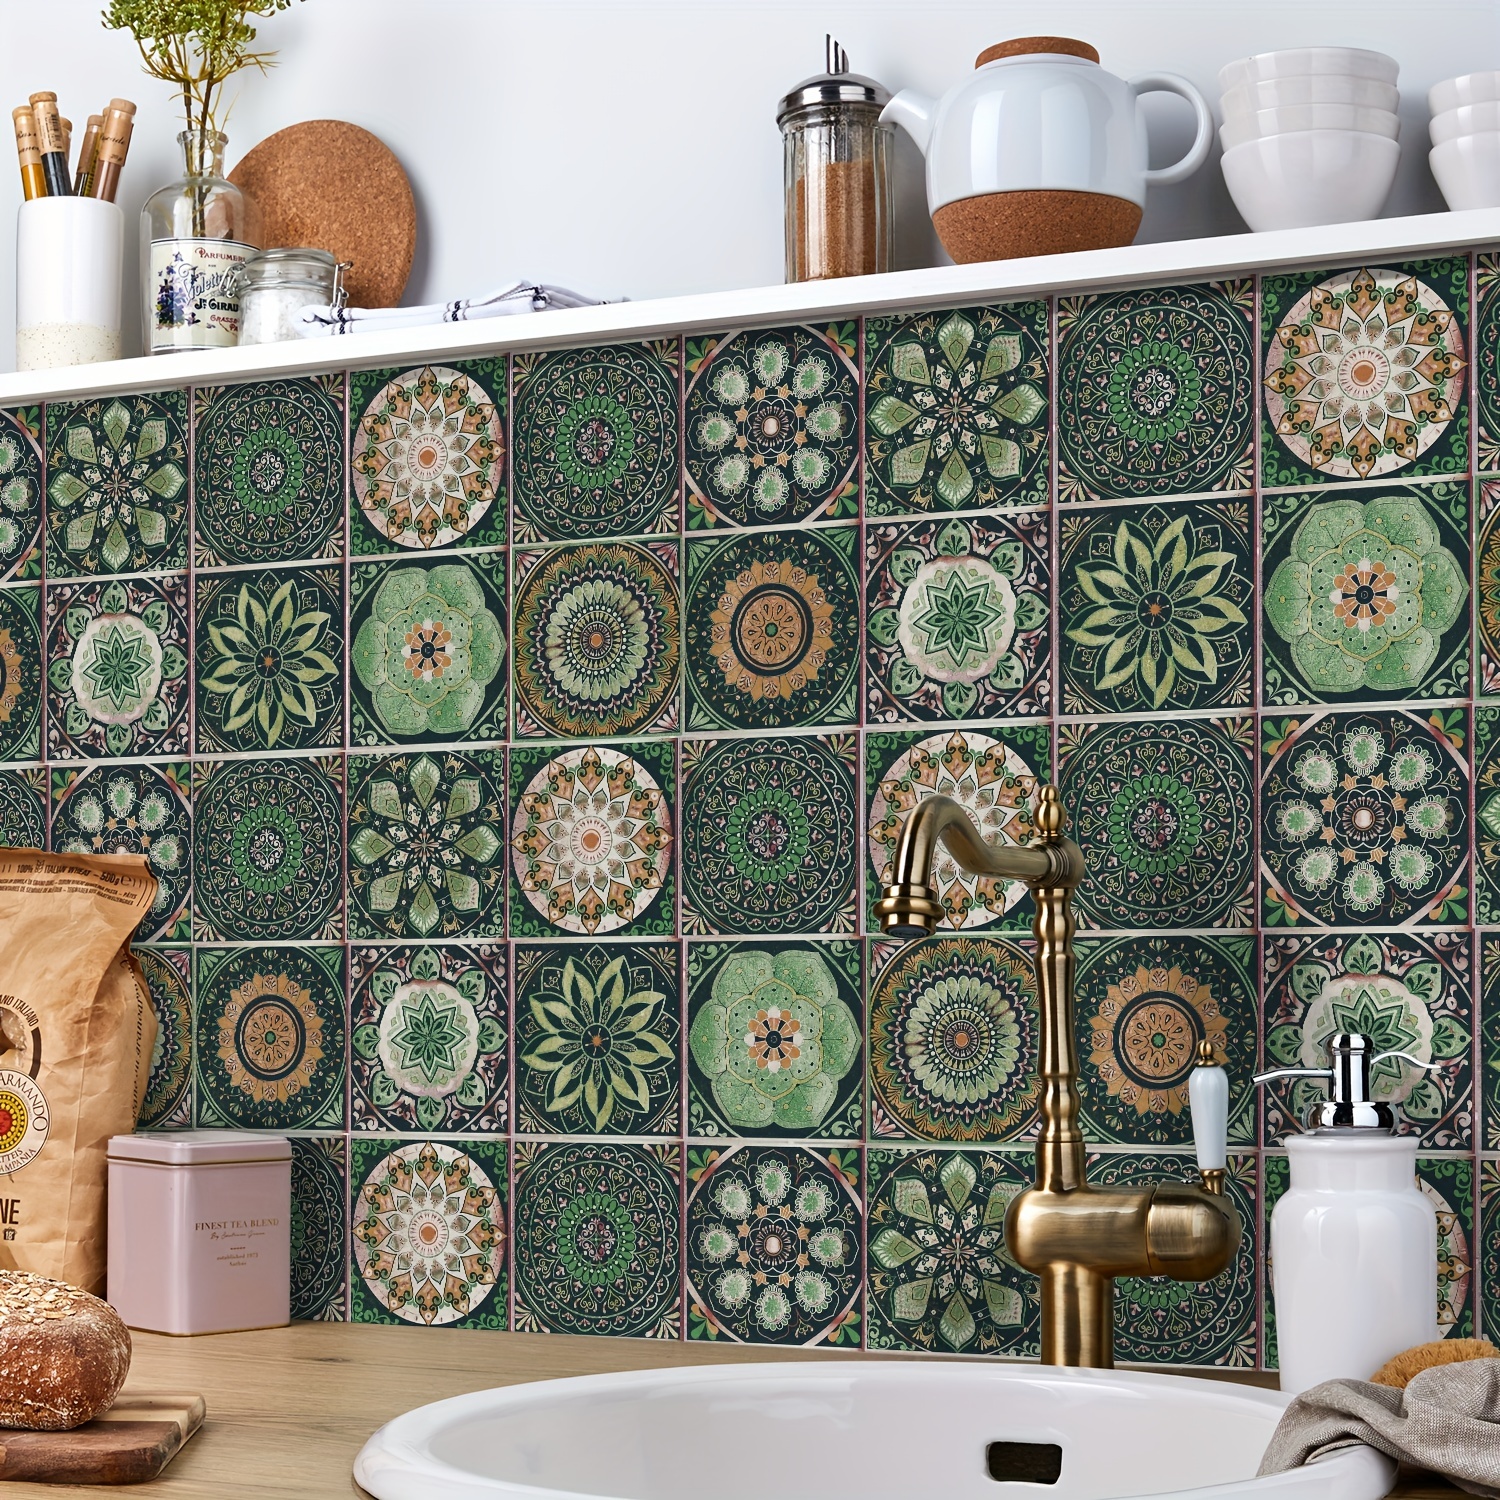 

Boho Style 24pcs Self-adhesive Decorative Tile Stickers, Waterproof & Oil-proof Moroccan Wall Decals, Plastic Kitchen & Bathroom Decor, 3.93x3.93inch